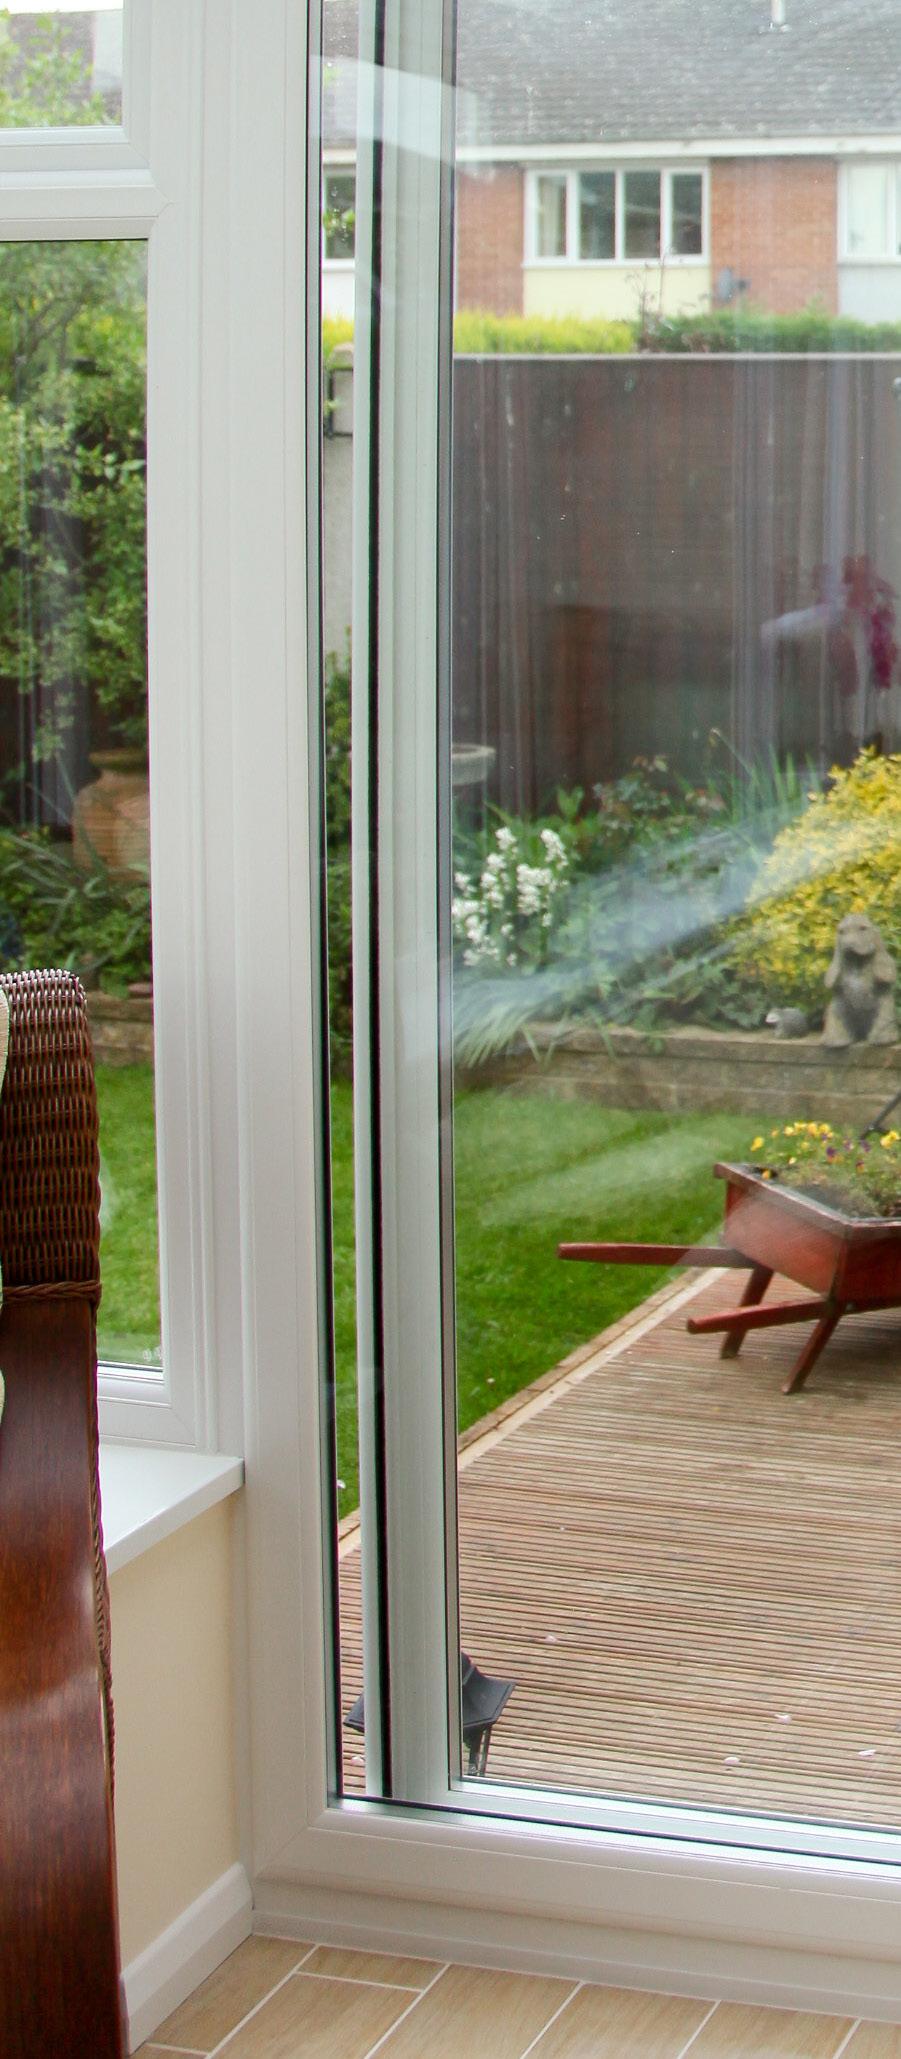 More information Visit the Liniar website and social media channels to find out more about Liniar patio doors. Brochures Visit the Liniar homeowner centre at http://bit.